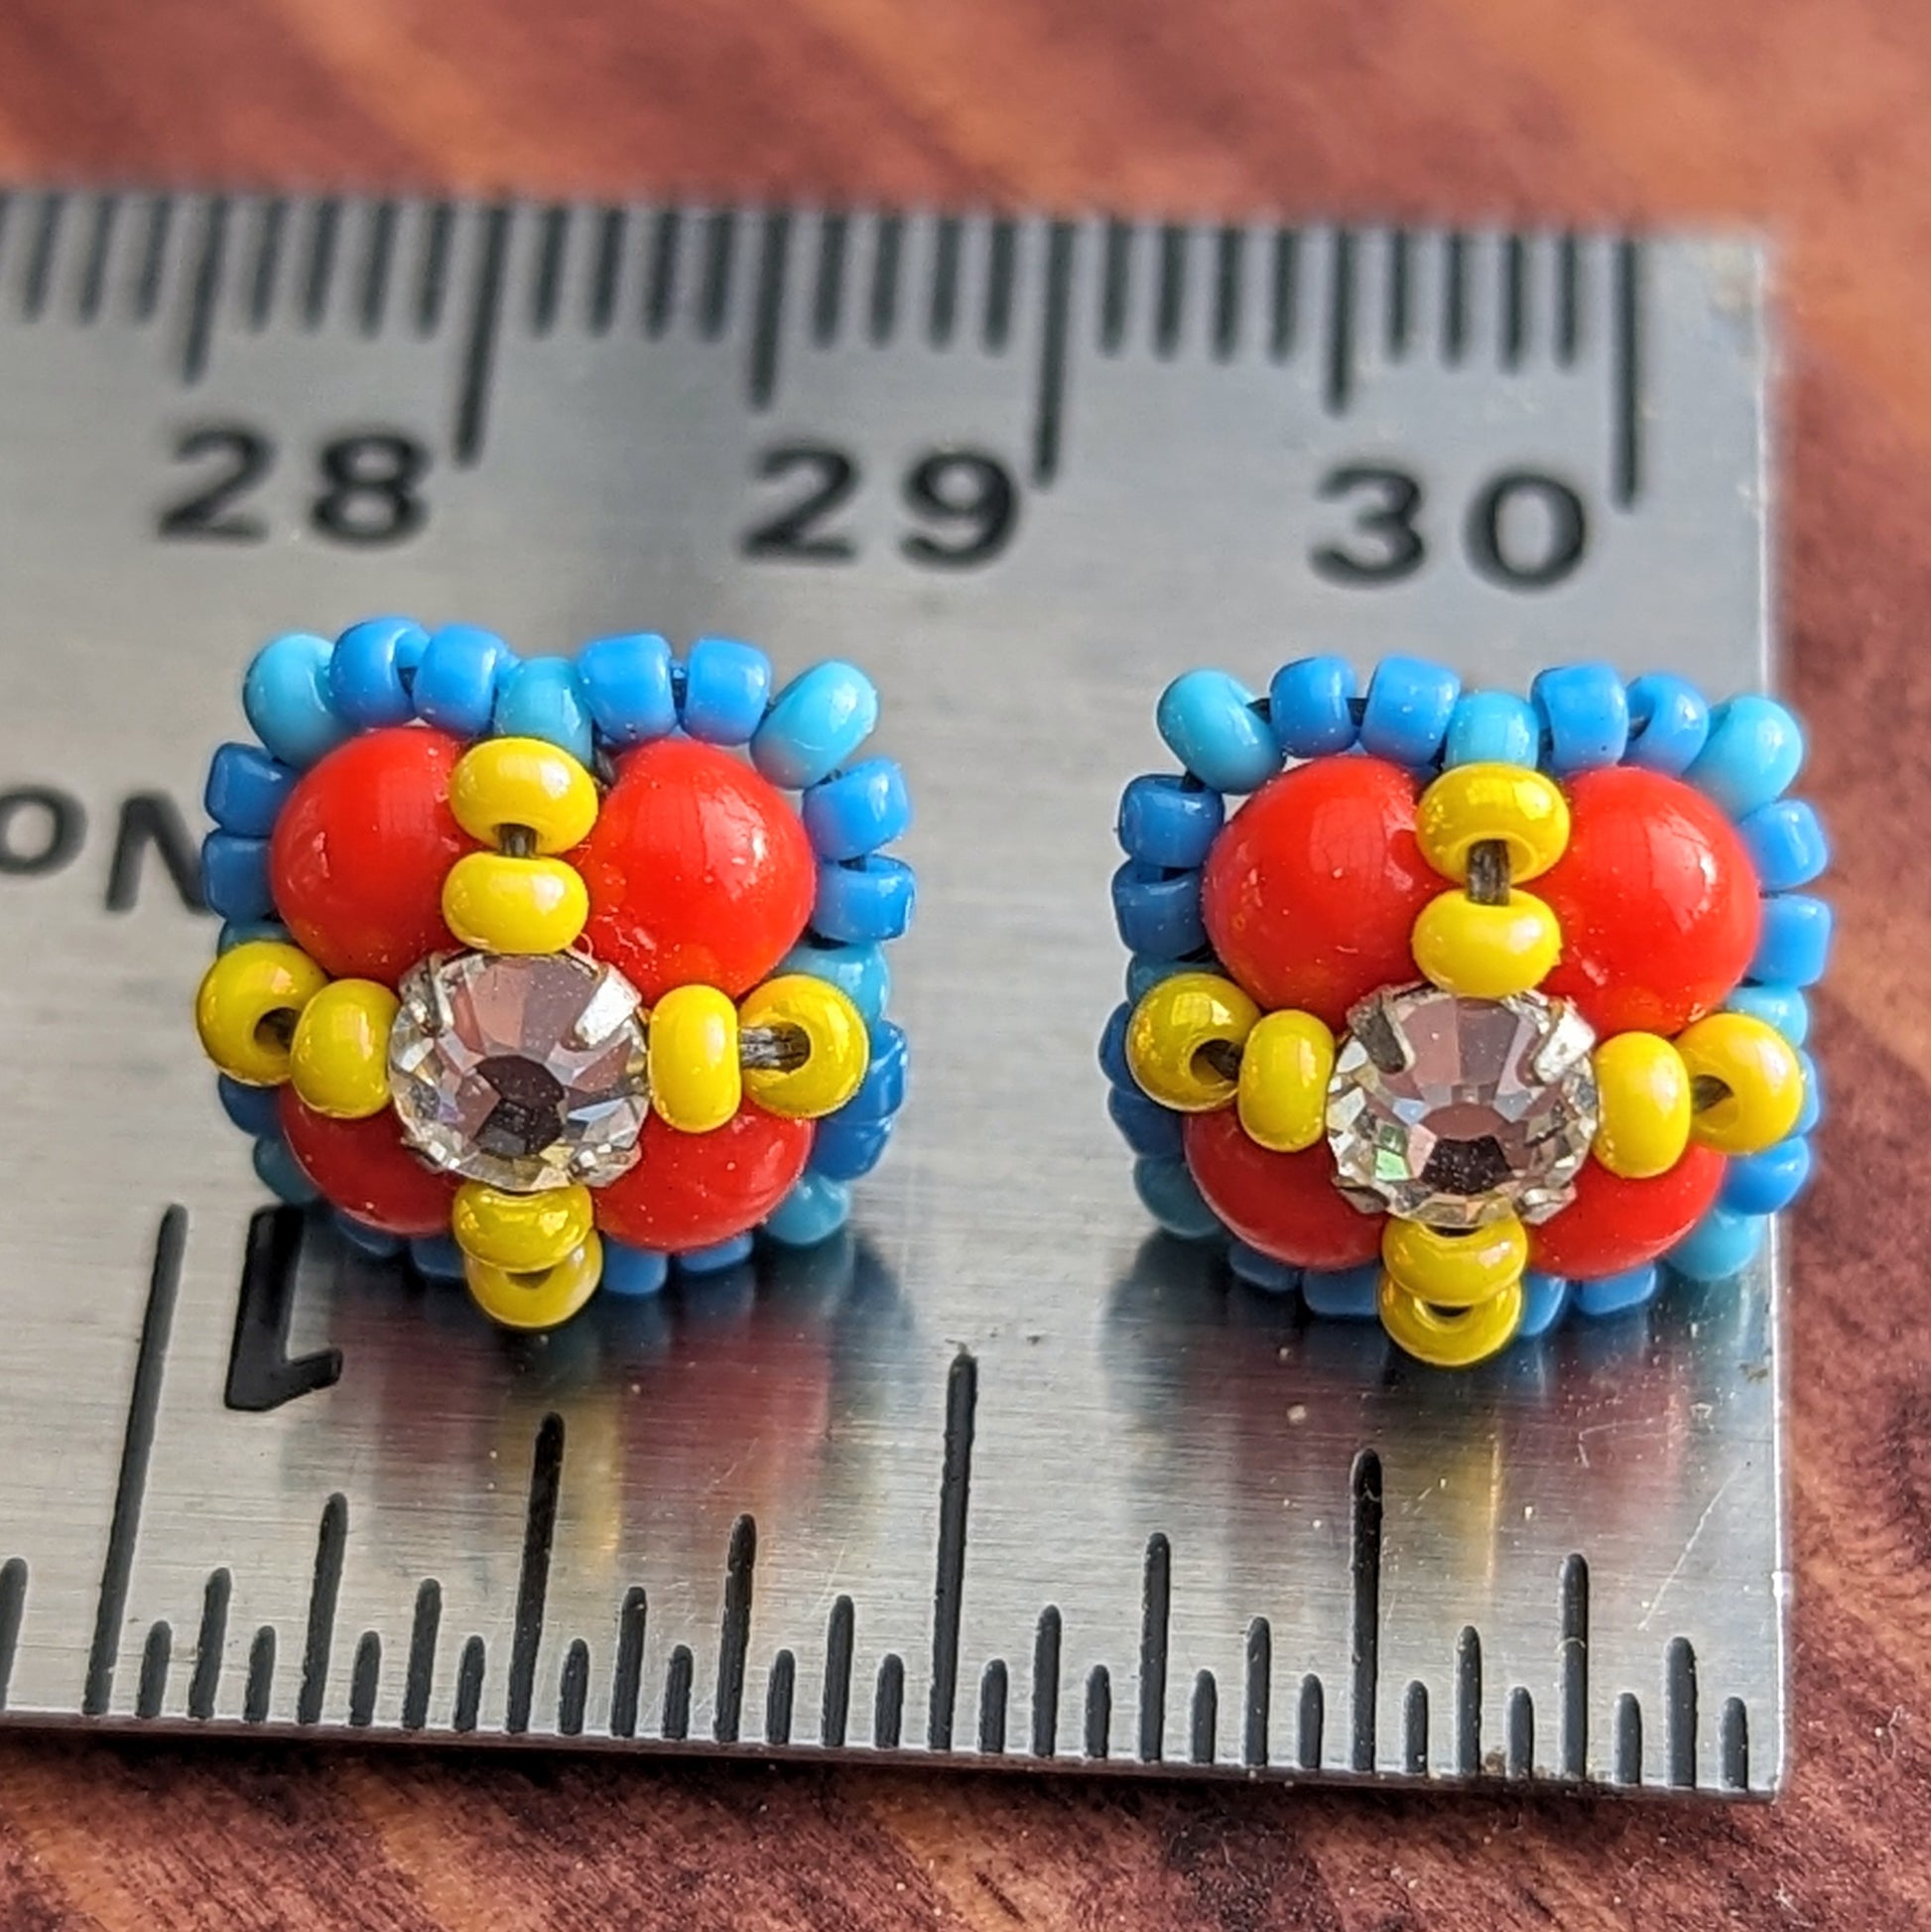 Square stud earrings formed from four red beads with a clear rhinestone held in place by an x-shape of yellow seed beads. The outside of the earrings is outlined in medium blue seed beads. The earrings are resting on a silver metal ruler showing they are about 3/8ths inch wide.